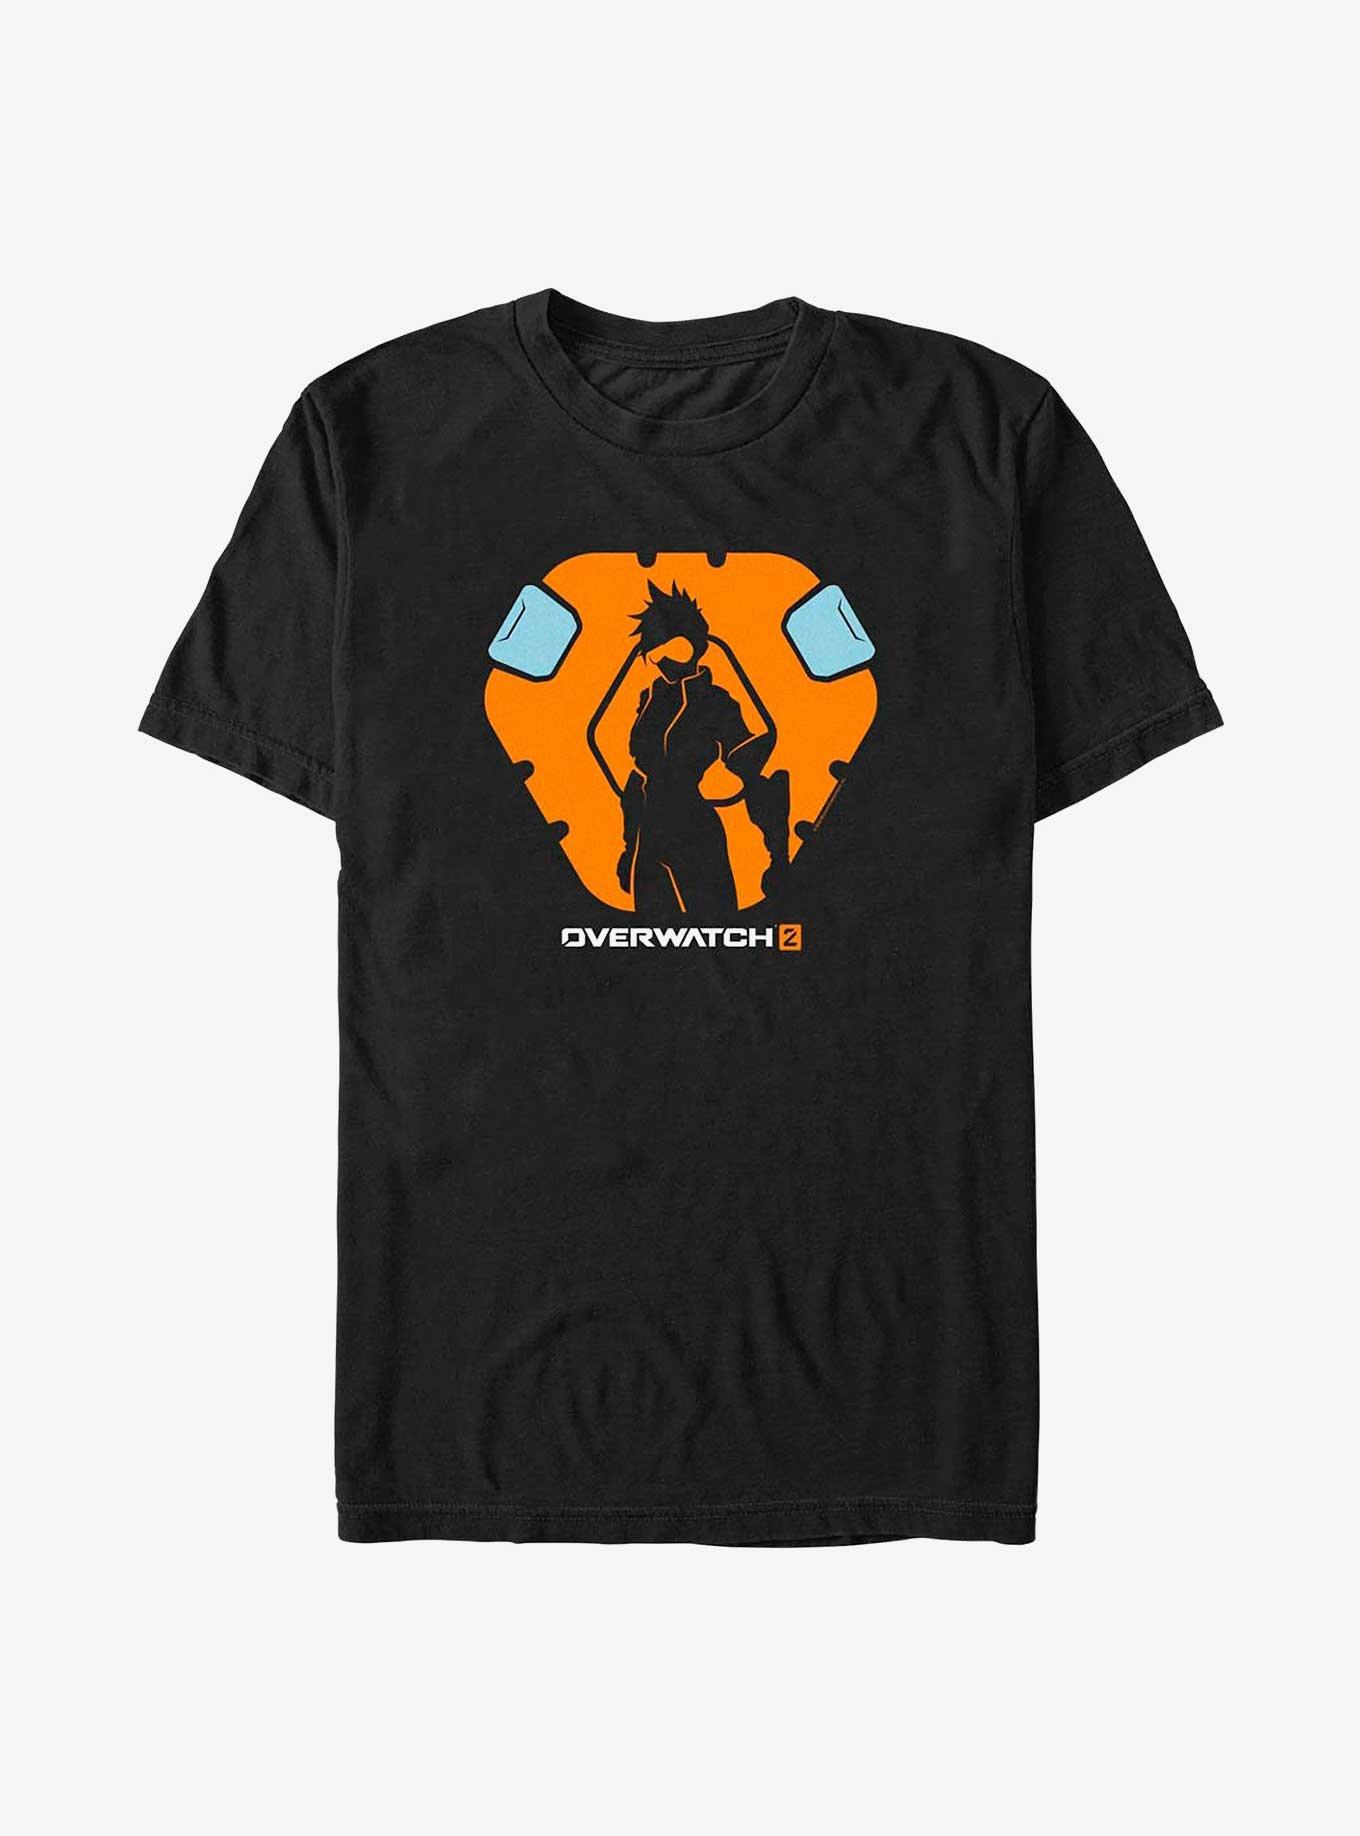 Overwatch 2 Tracer Silhouette T-Shirt, BLACK, hi-res